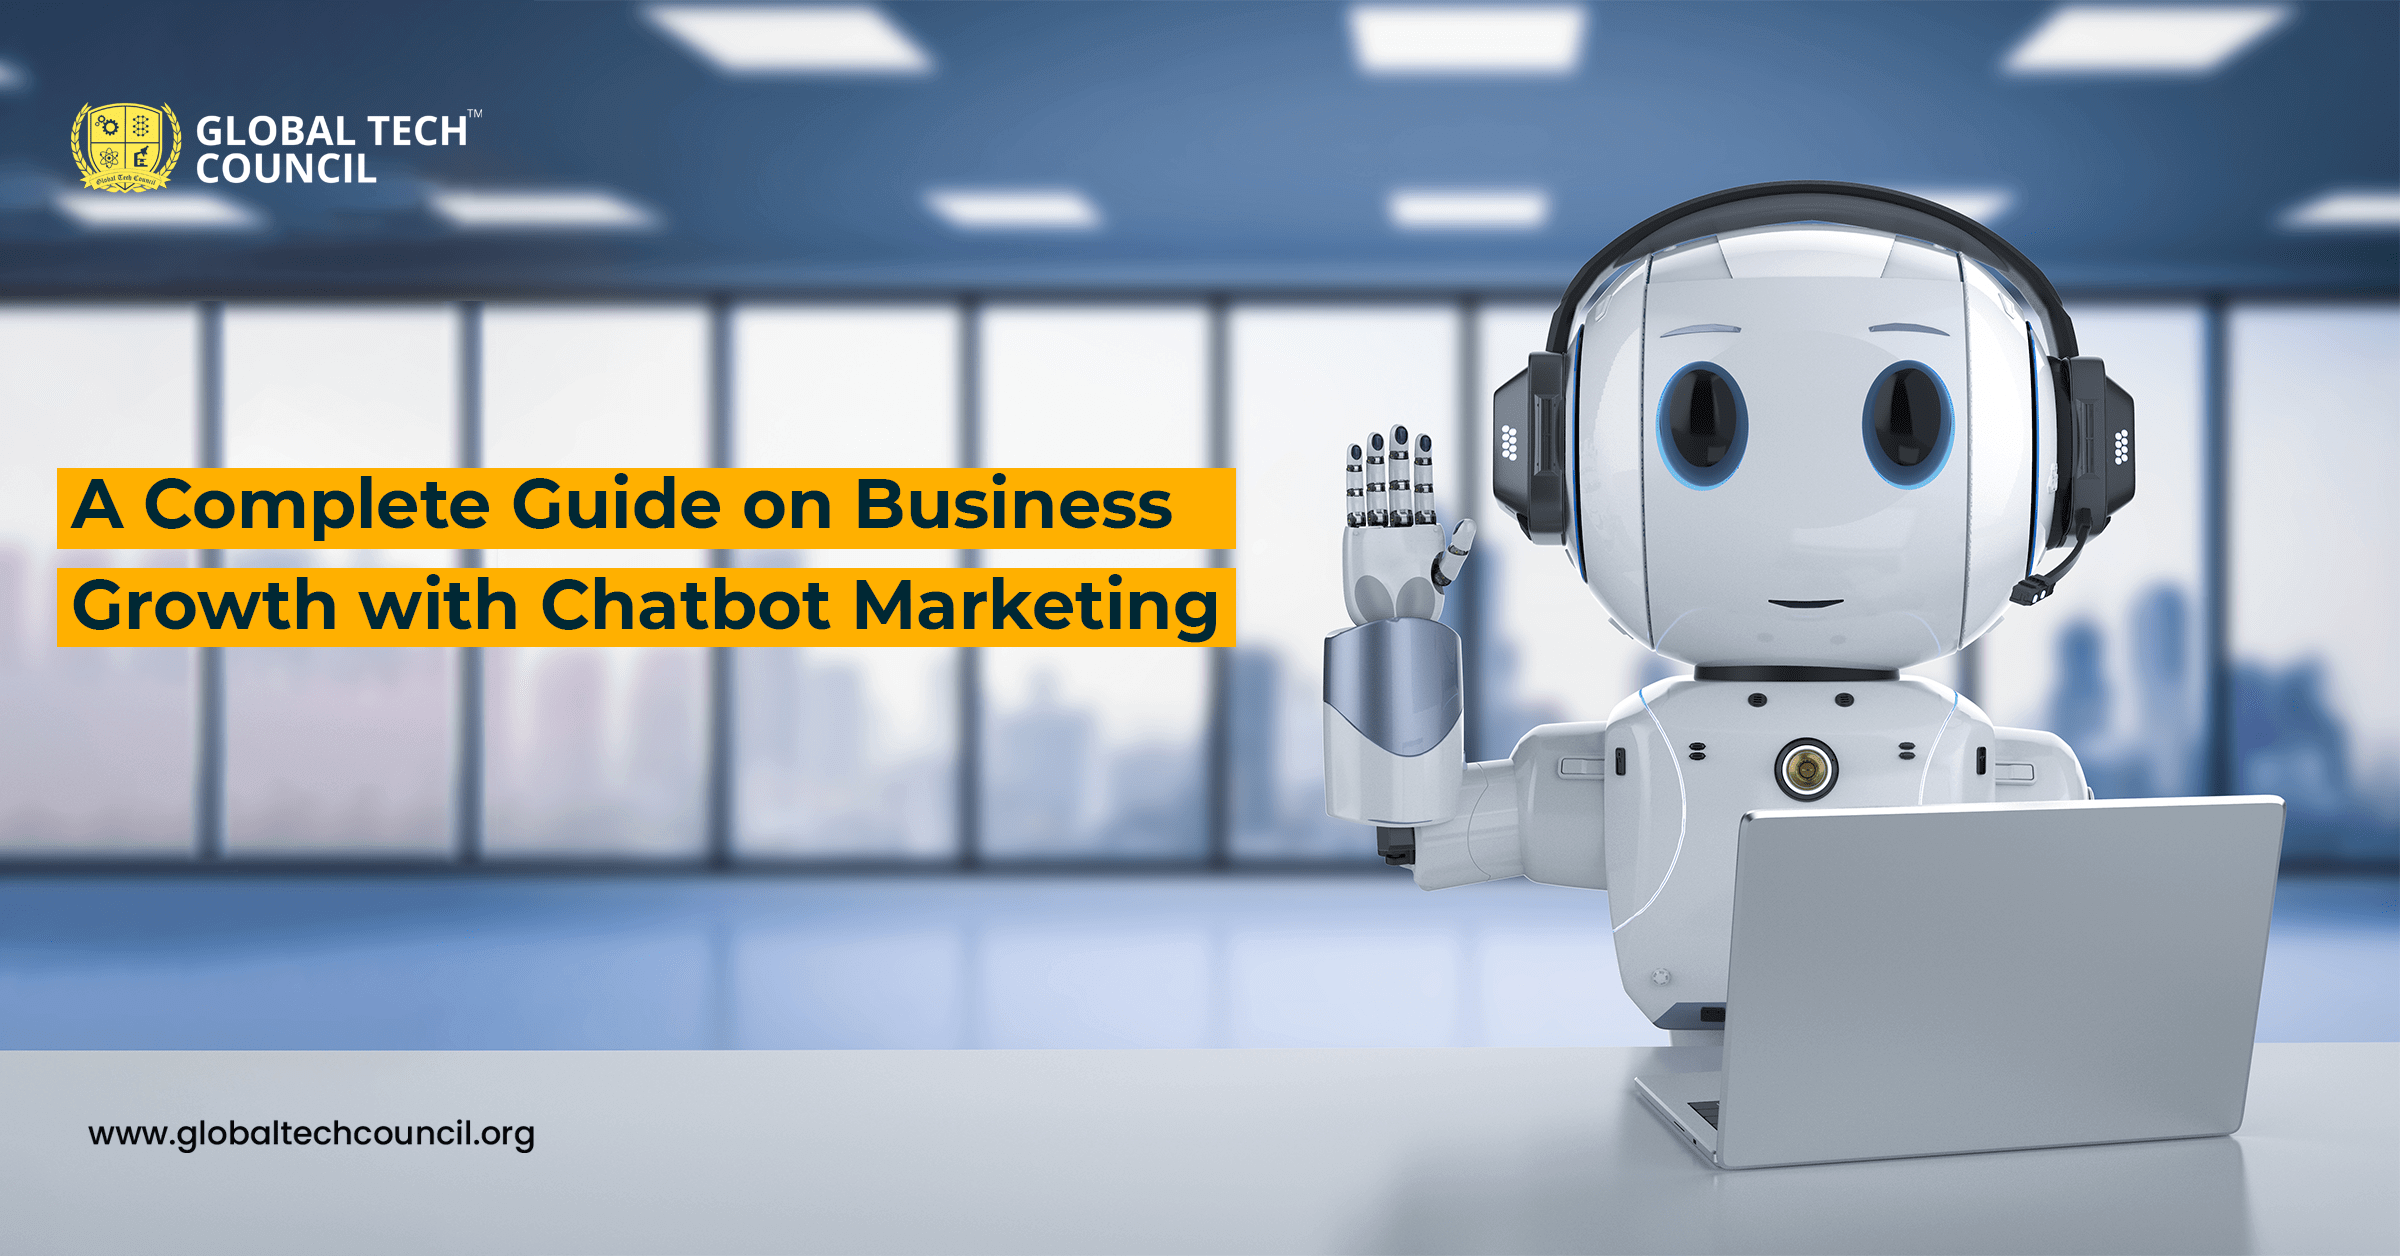 A Complete Guide on Business Growth with Chatbot Marketing